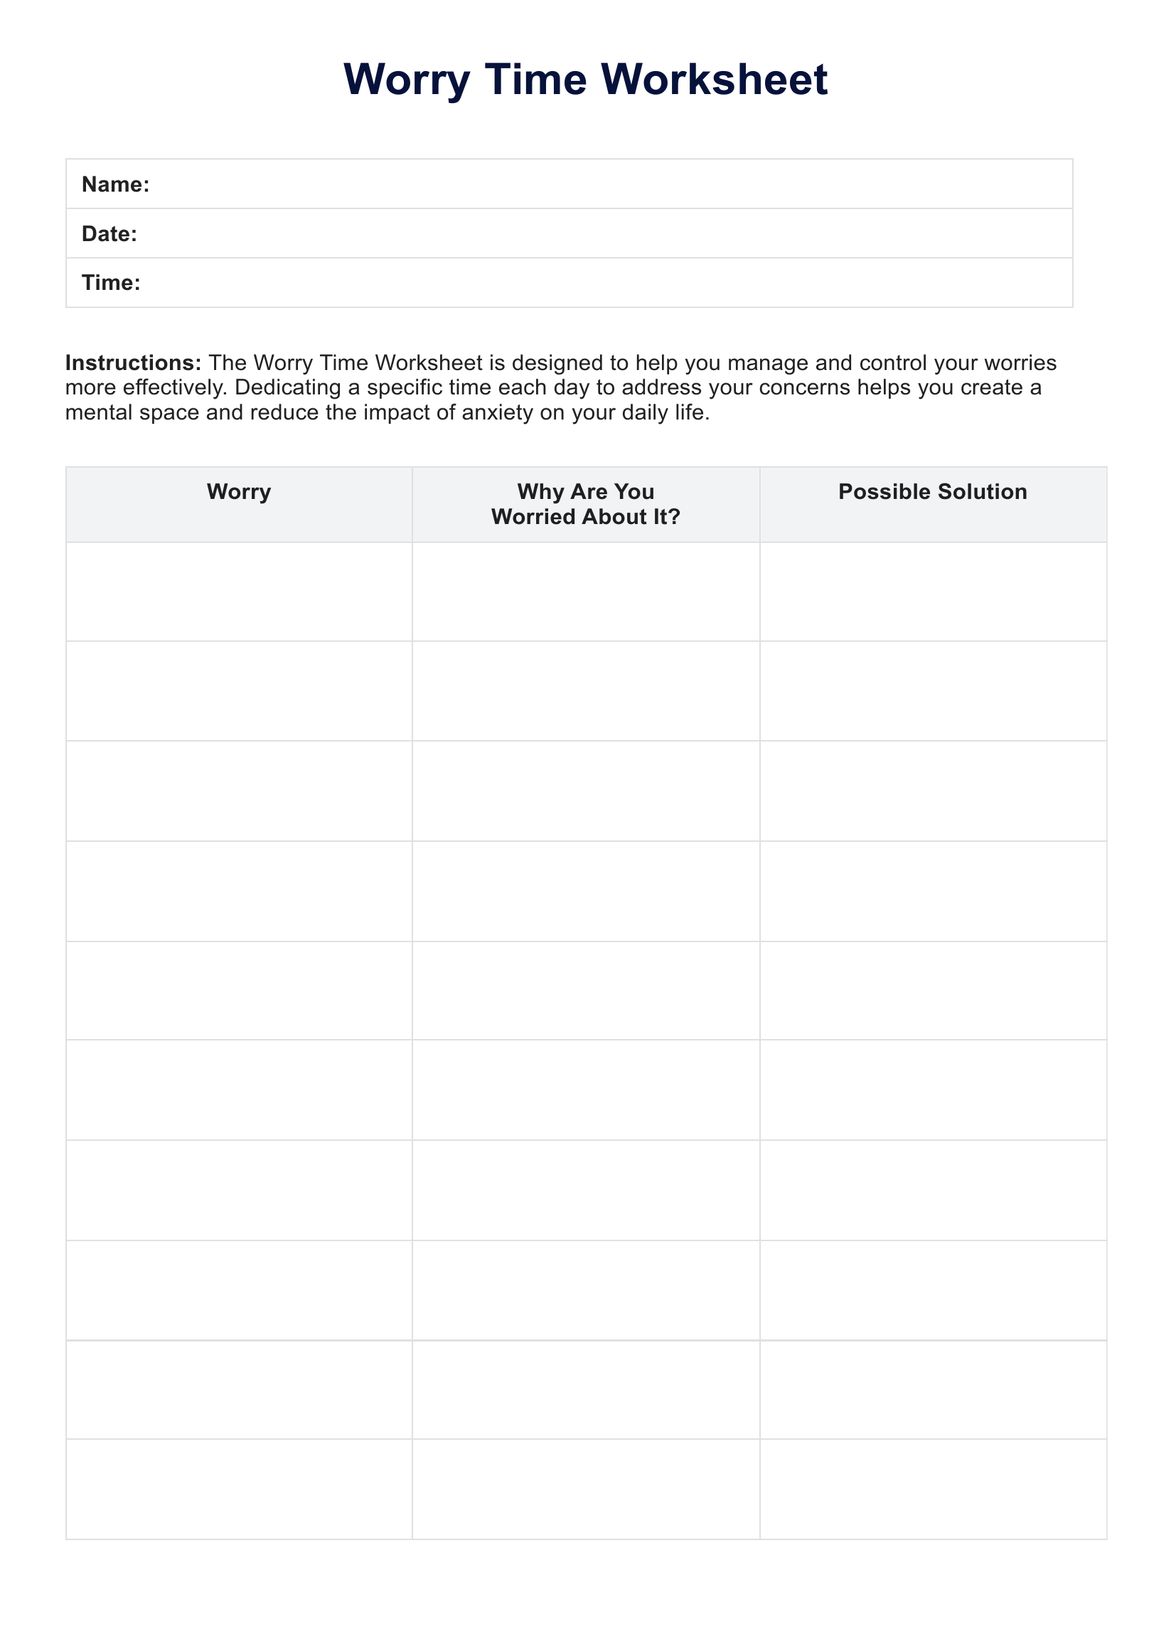 Worry Time Worksheet PDF Example